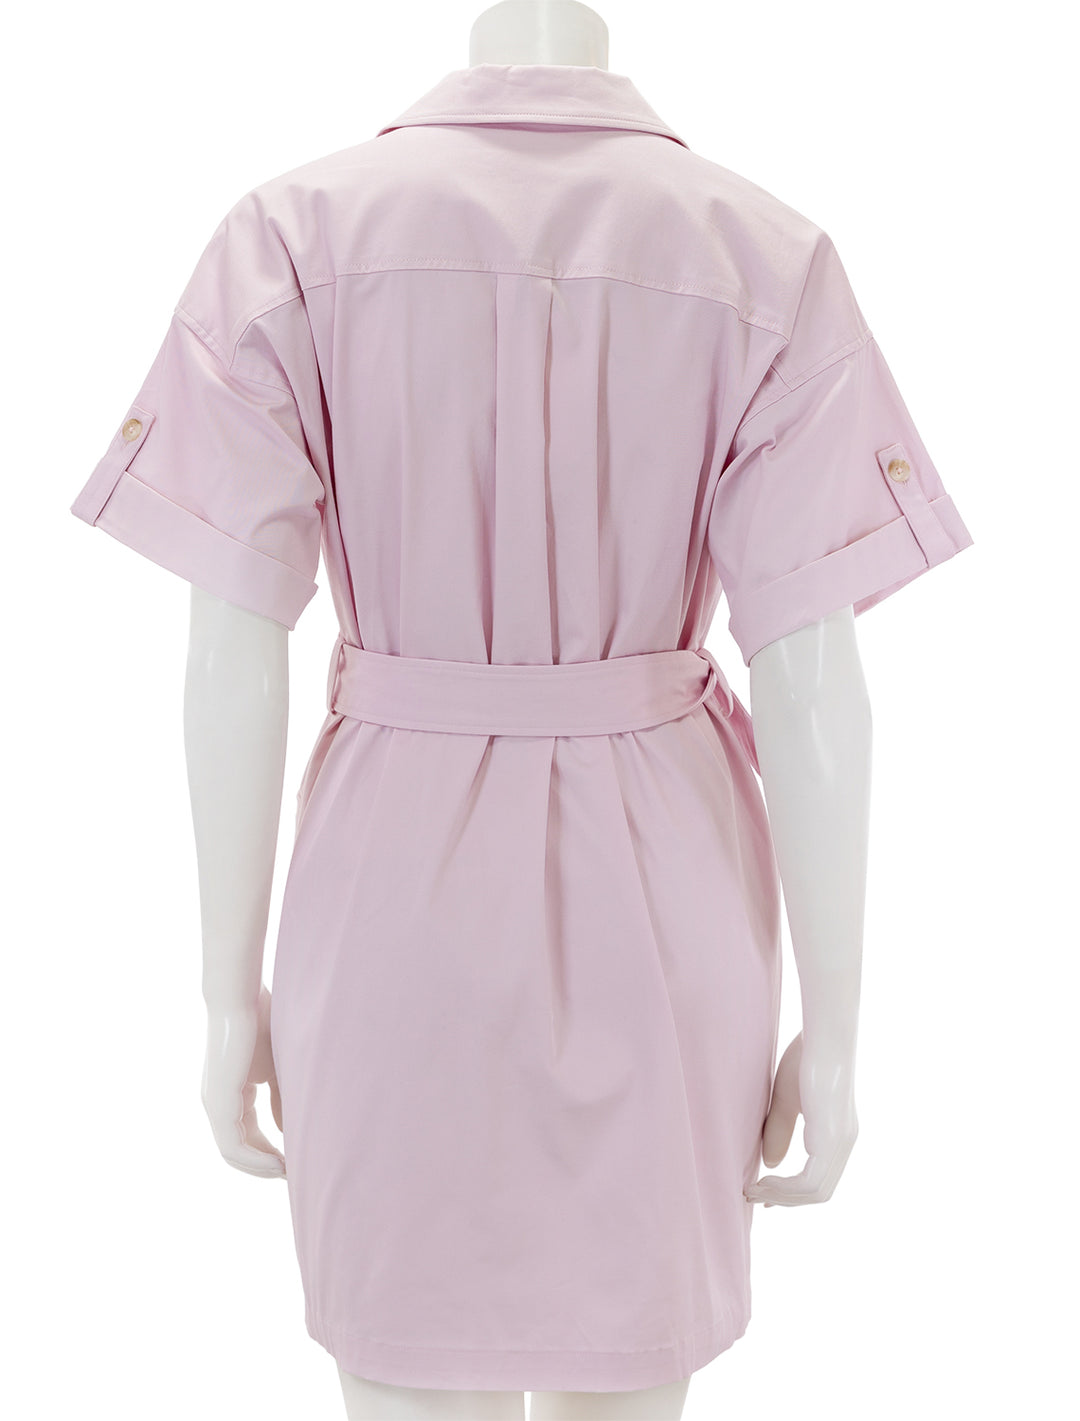 Back view of L'Agence's everest safari shirt dress in lilac snow.